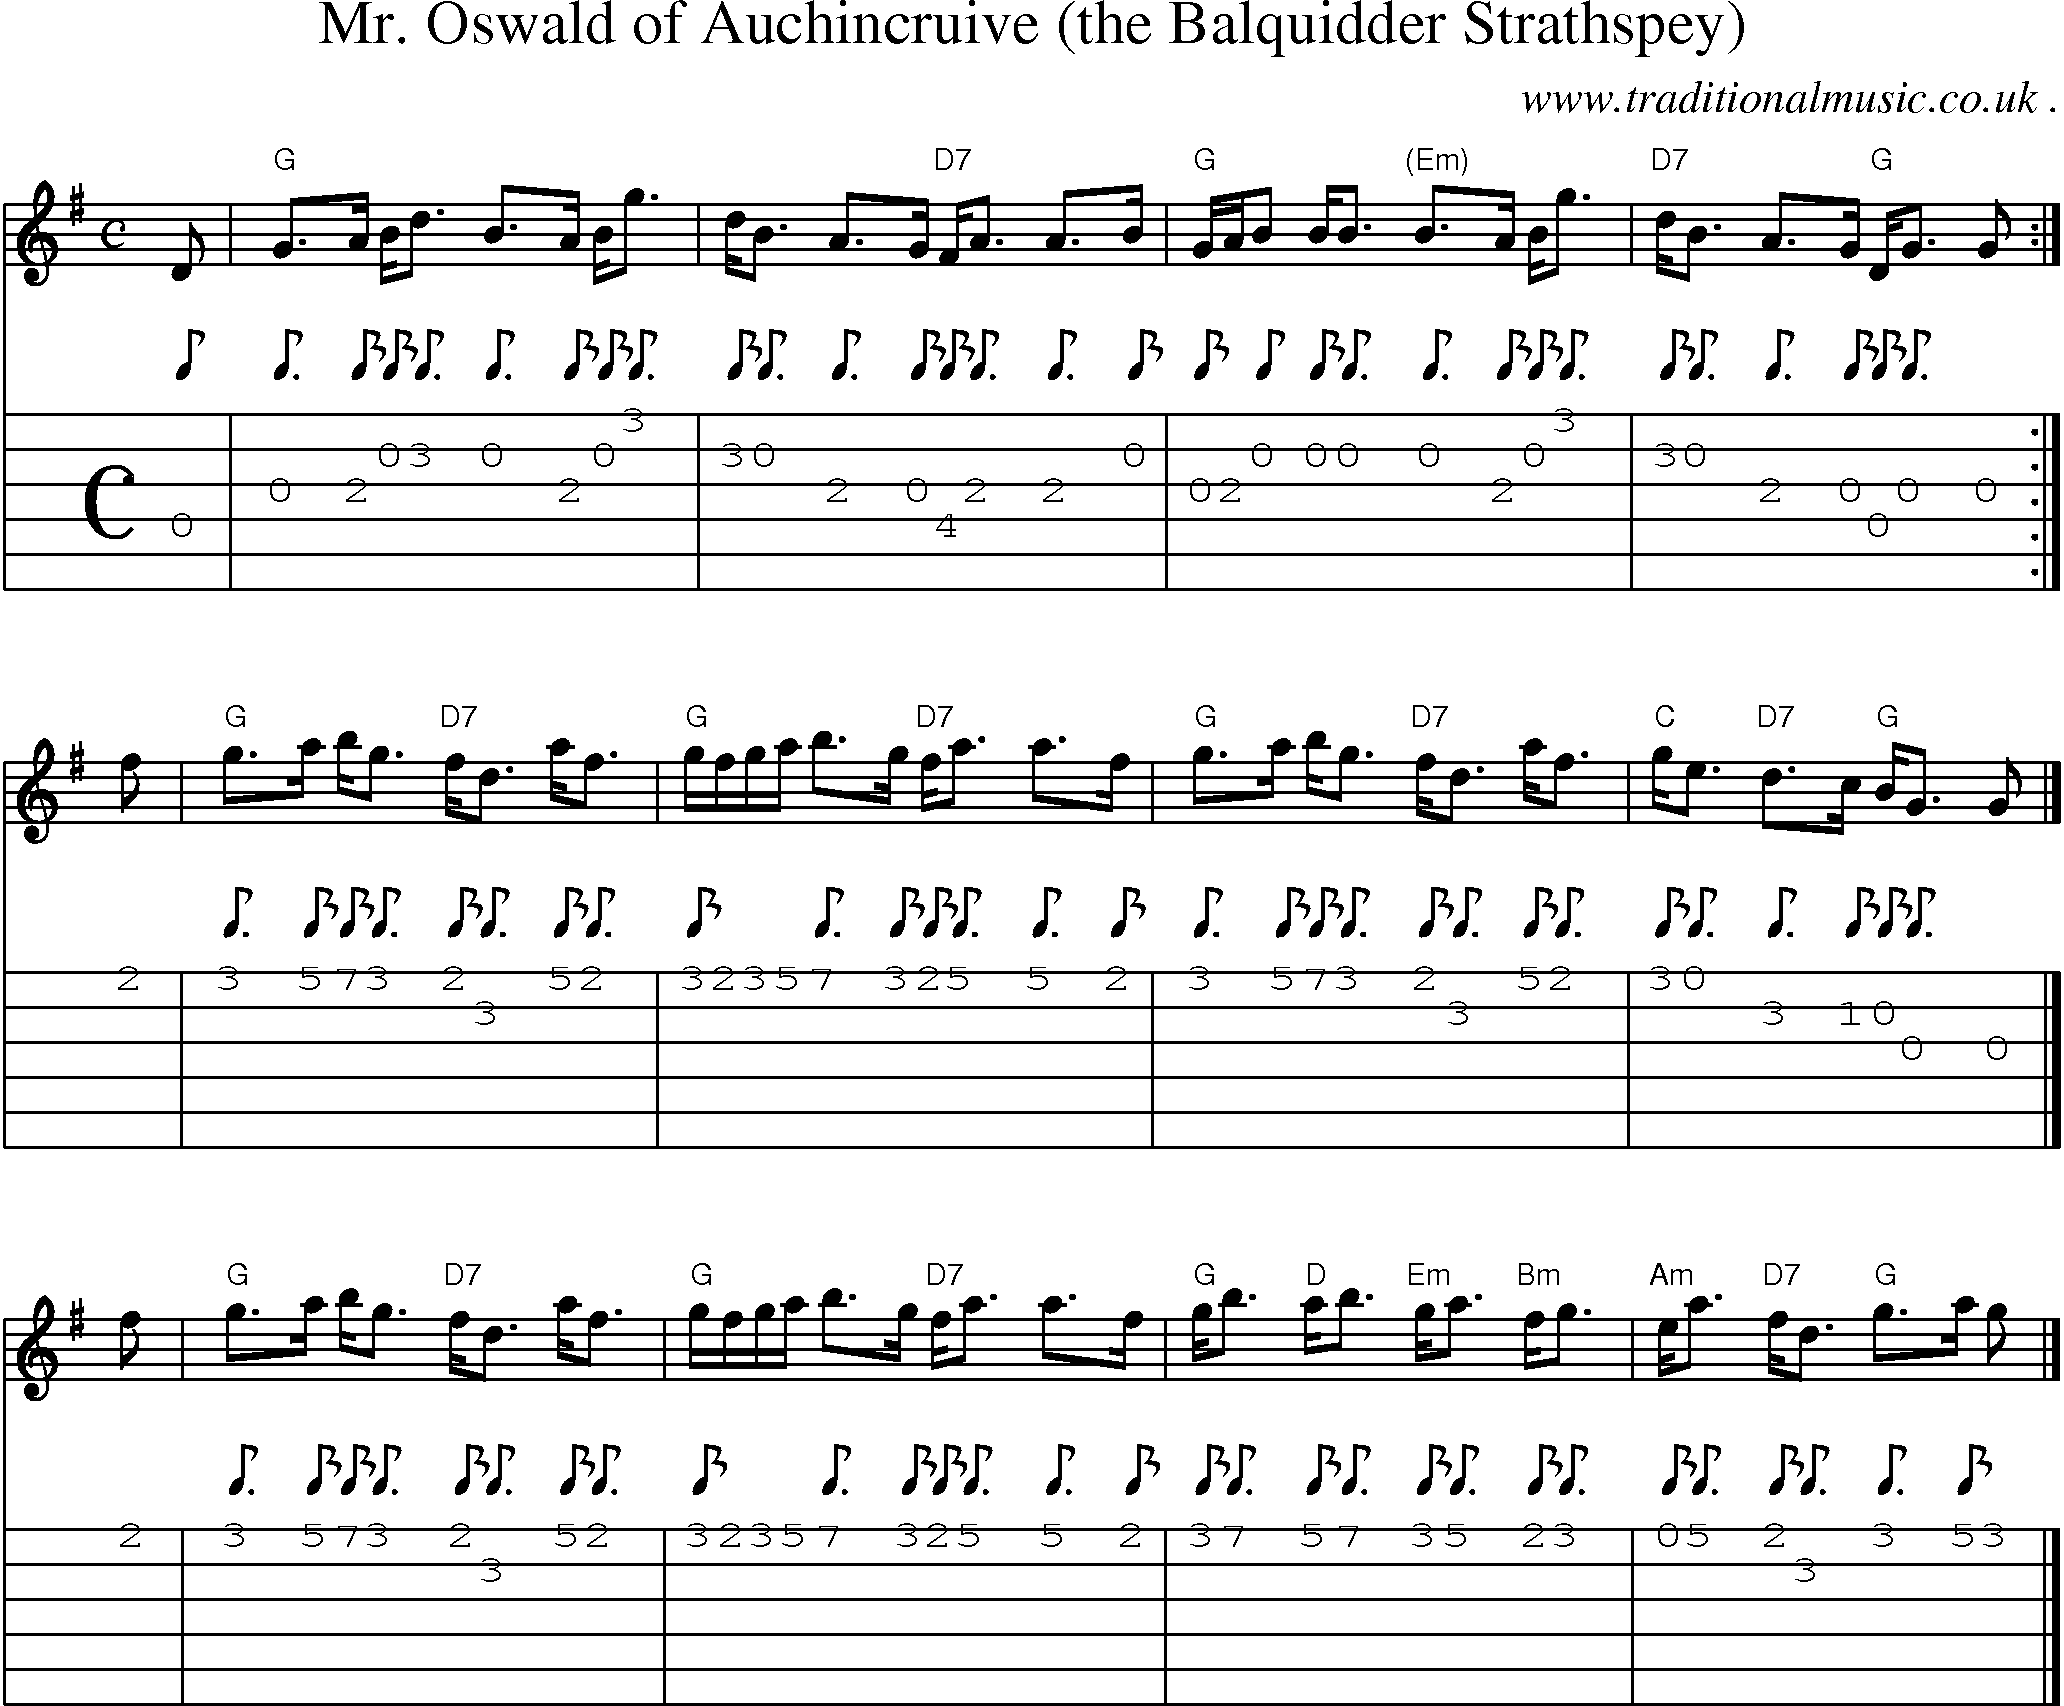 Sheet-music  score, Chords and Guitar Tabs for Mr Oswald Of Auchincruive The Balquidder Strathspey